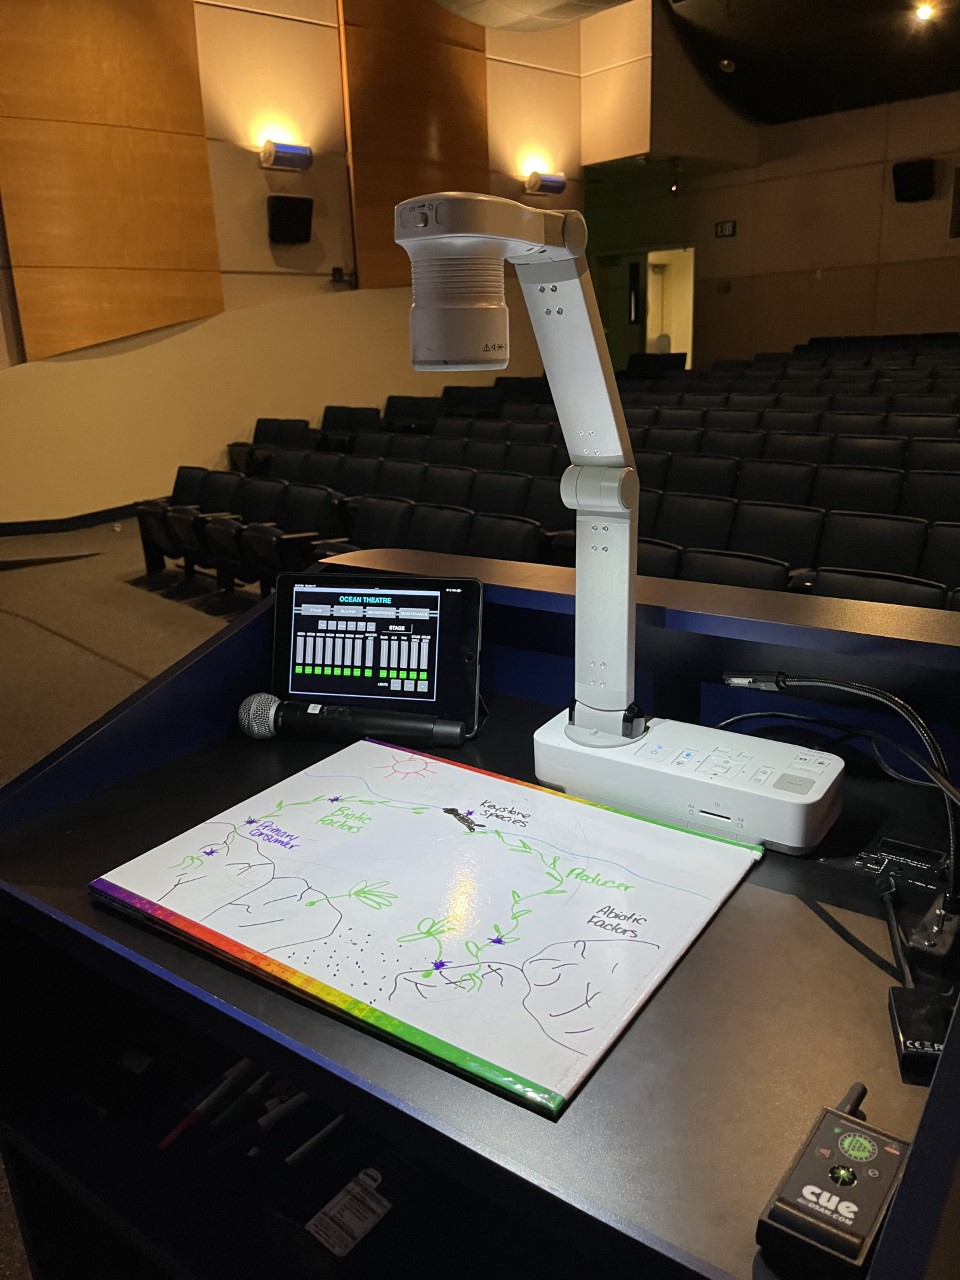 A document camera from Epson at work.